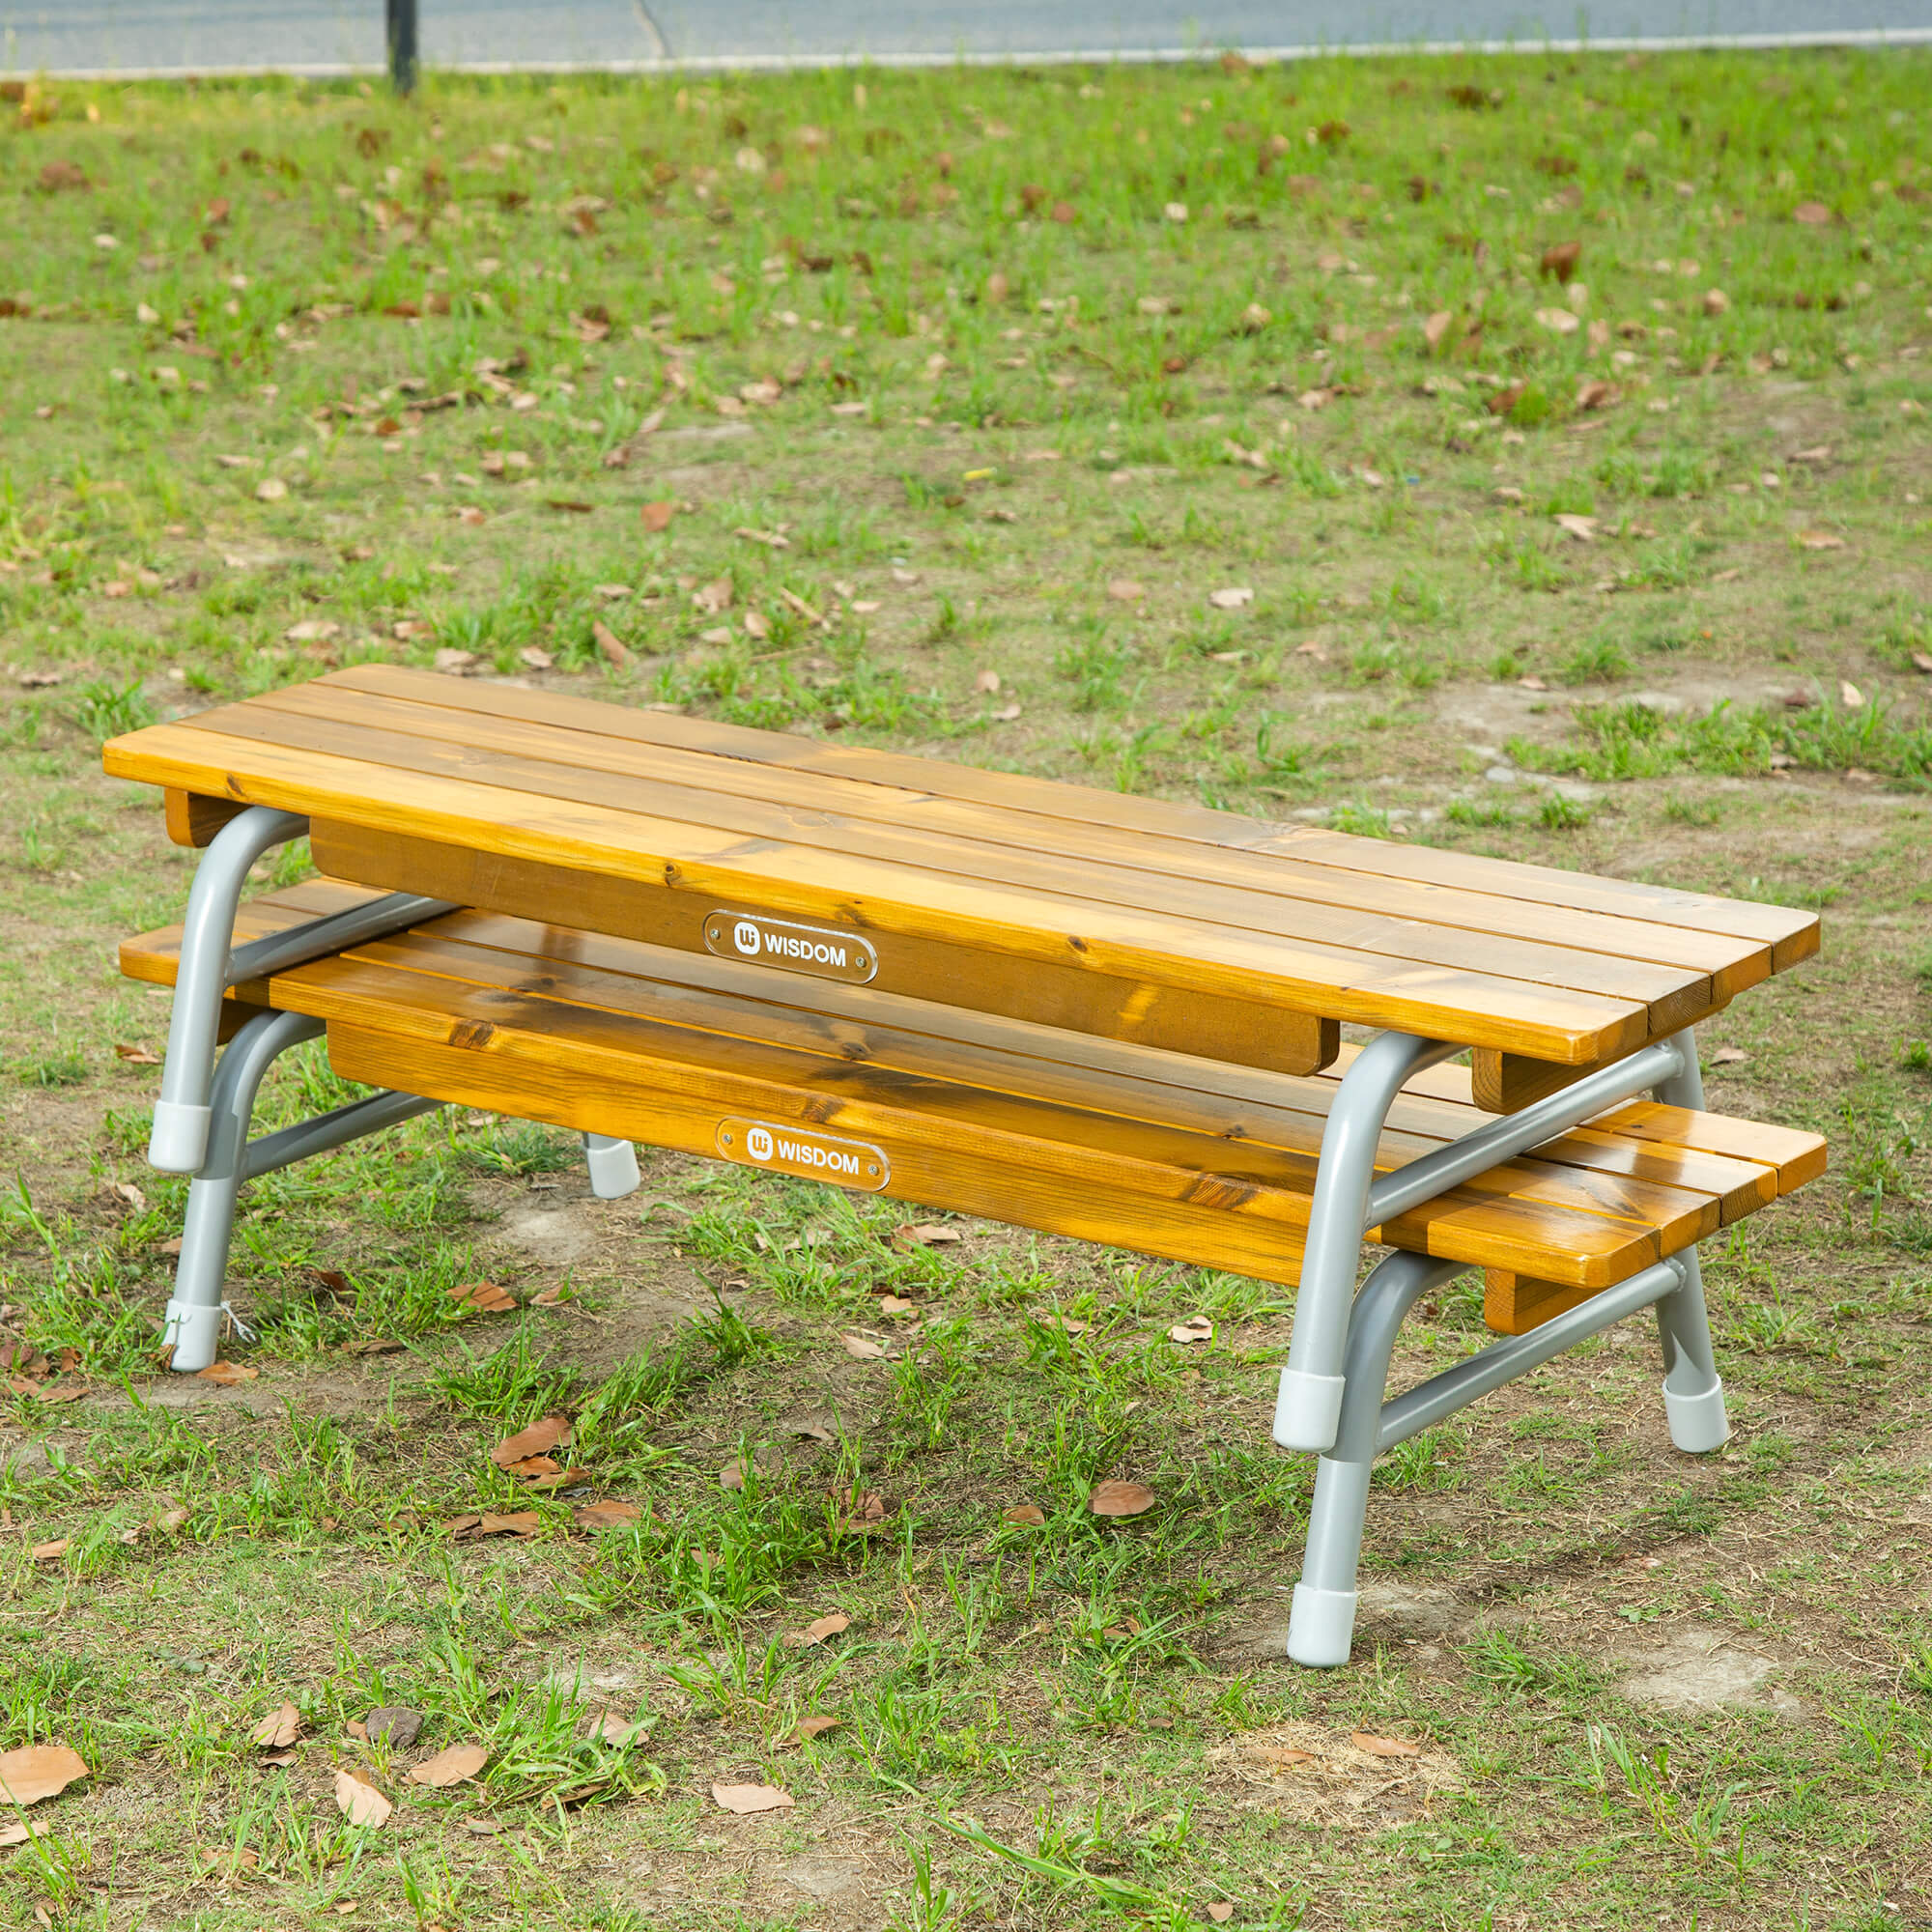 Outdoor Stacking Bench Pack of 2